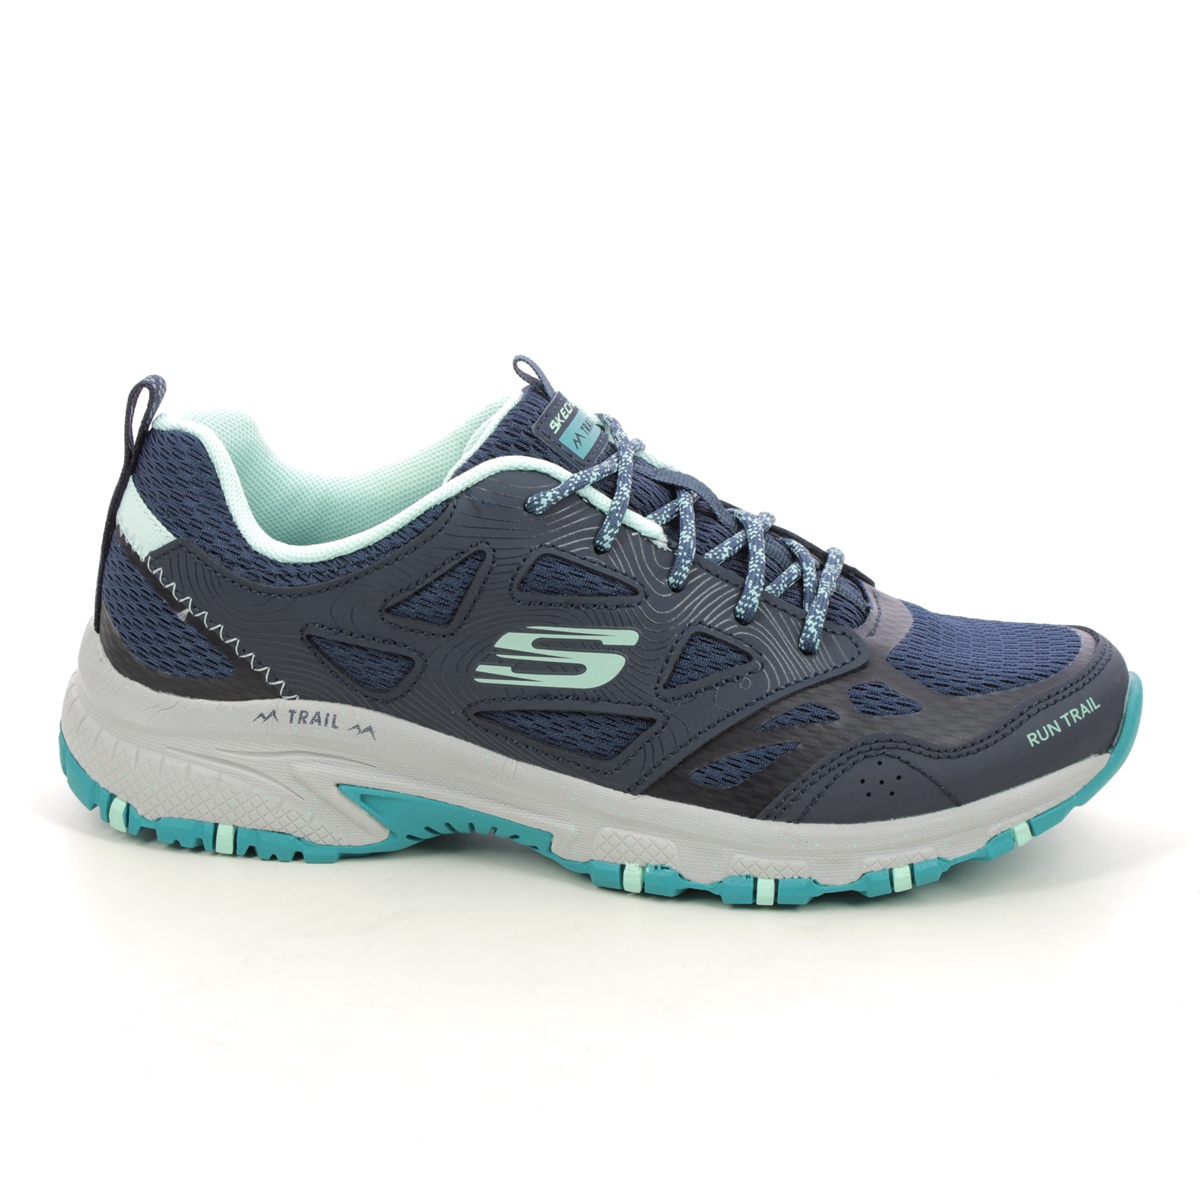 Skechers Hillcrest NVTQ Navy Turquoise Womens trainers 149821